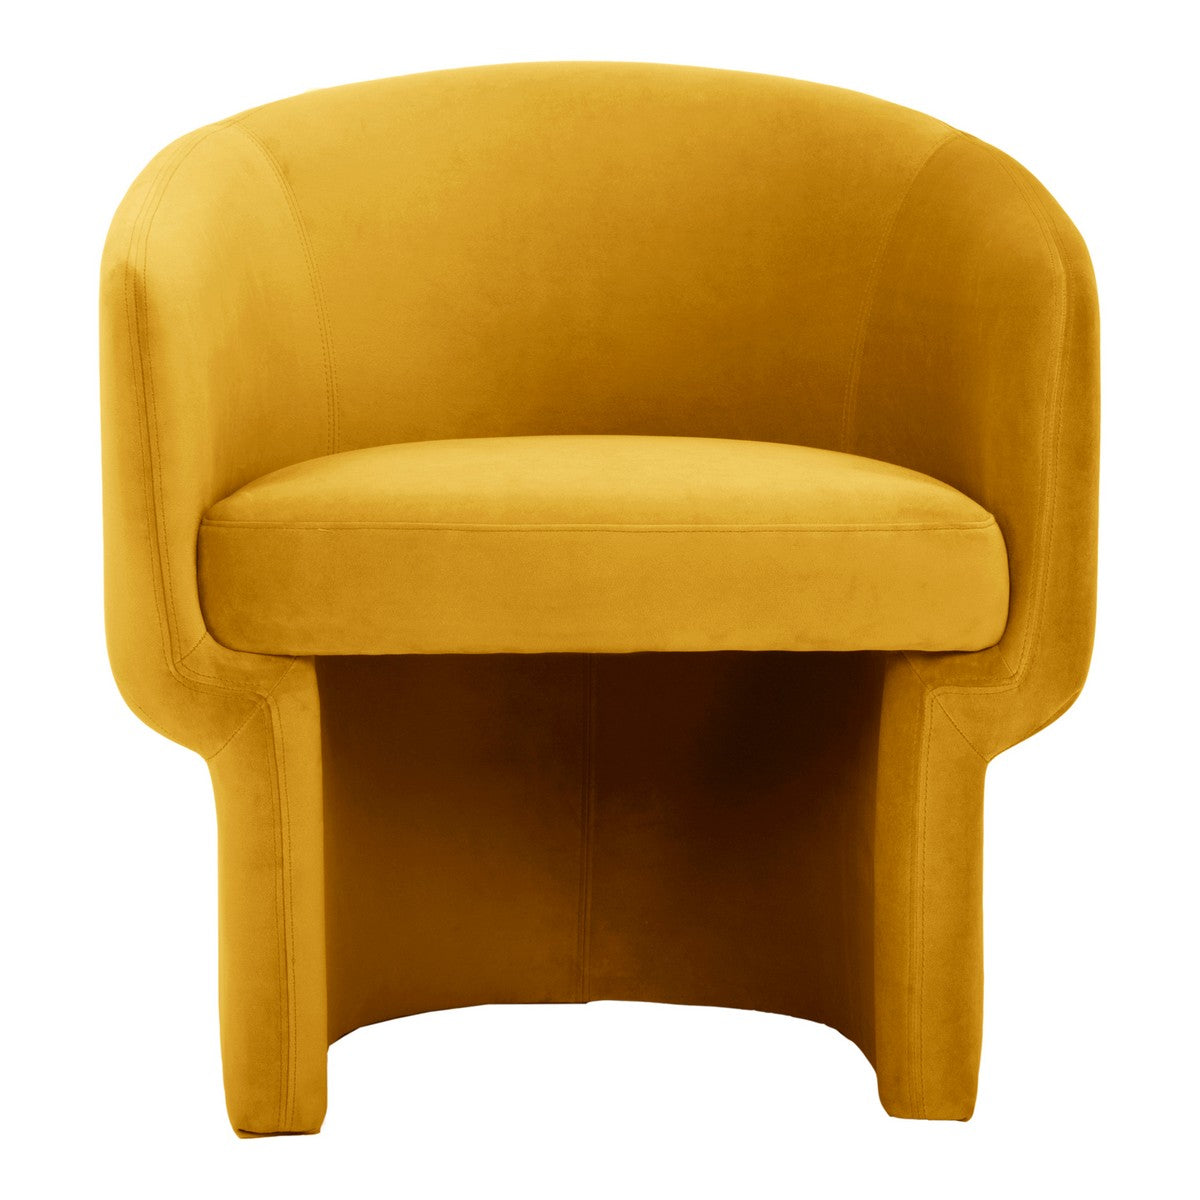 Moe's Home Collection Franco Chair Mustard - JM-1005-09 - Moe's Home Collection - lounge chairs - Minimal And Modern - 1